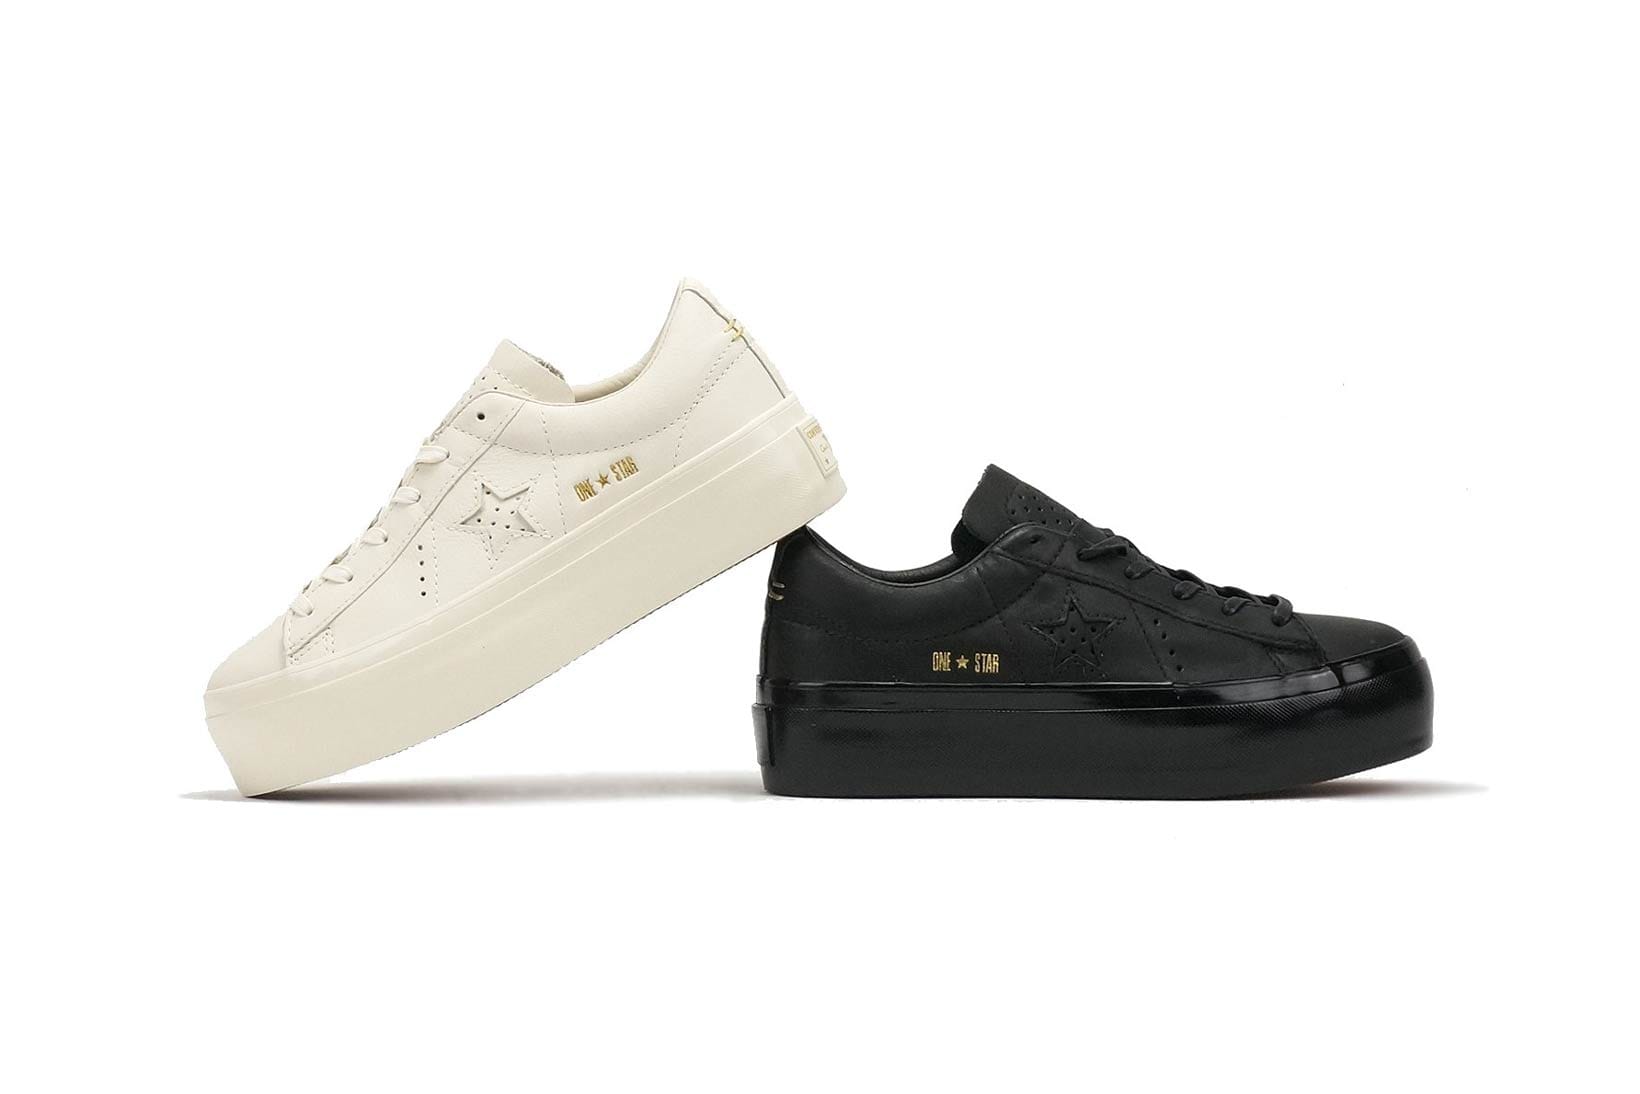 Converse's One Star Platform Releases 